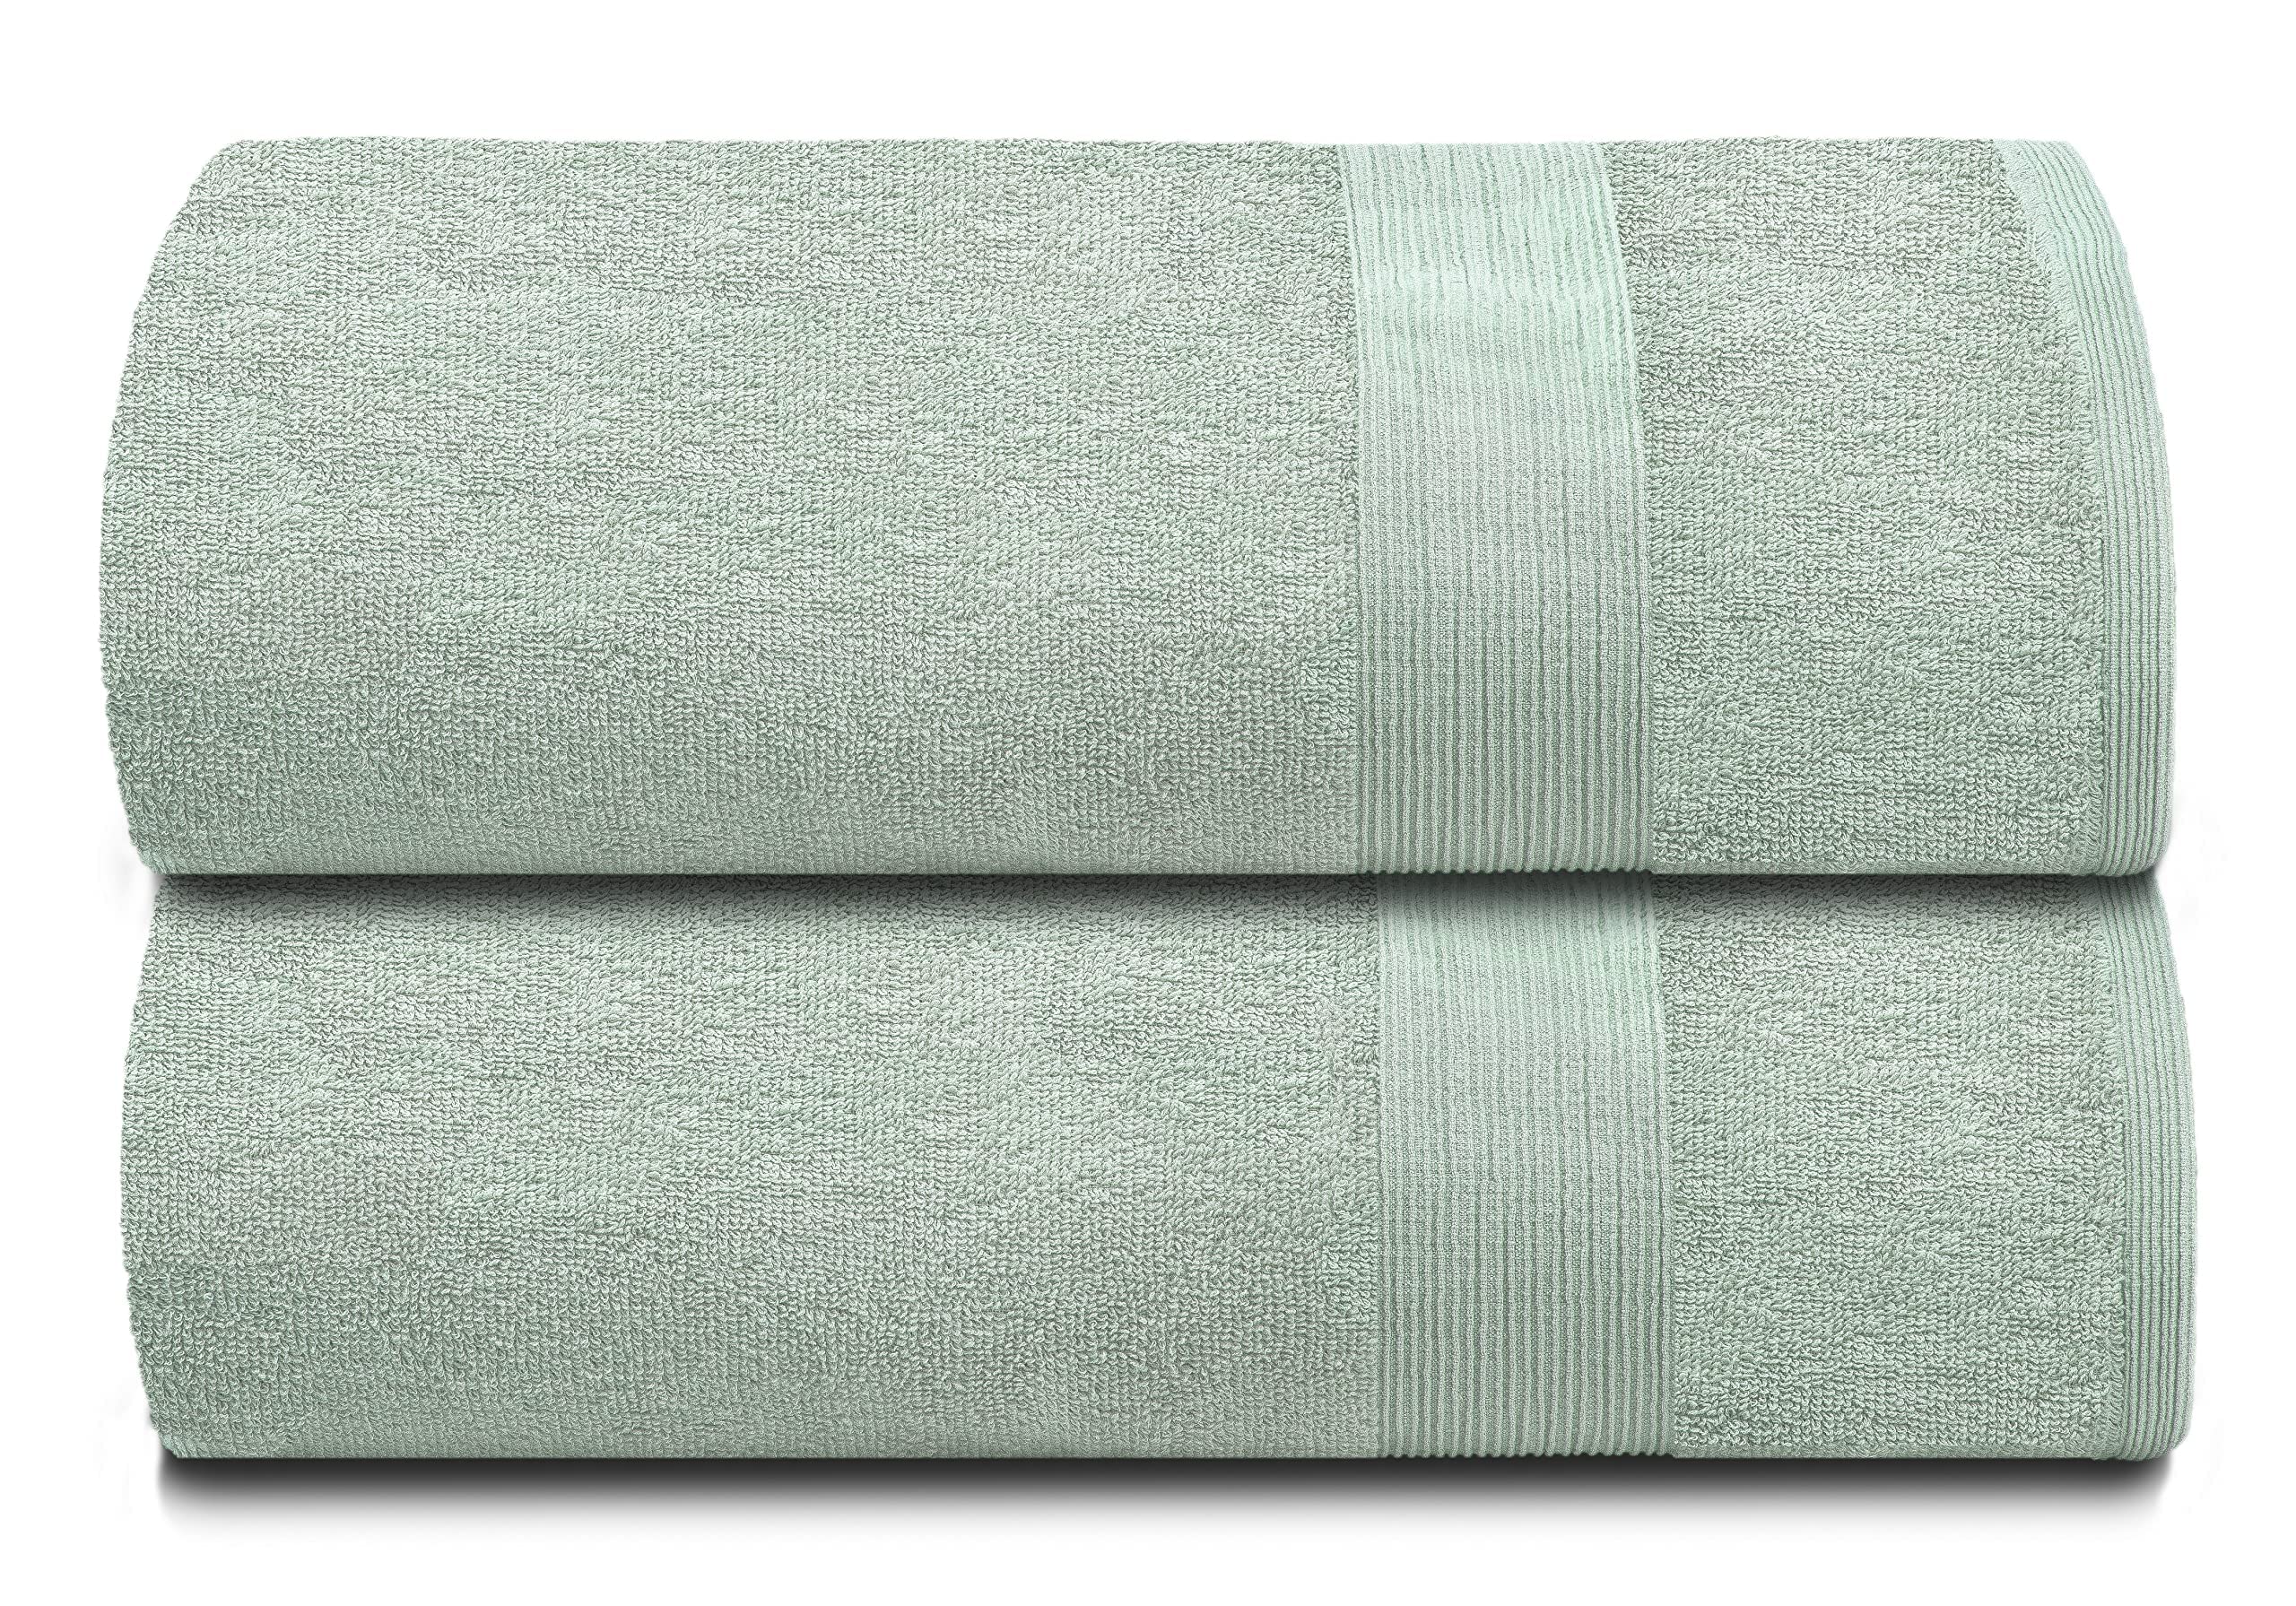 Belizzi Home Premium Cotton Oversized 2 Pack Bath Sheet 35x70 - 100% Pure  Cotton - Ideal for Everyday use - Ultra Soft & Highly Absorbent - Machine  Washable - Sea Green